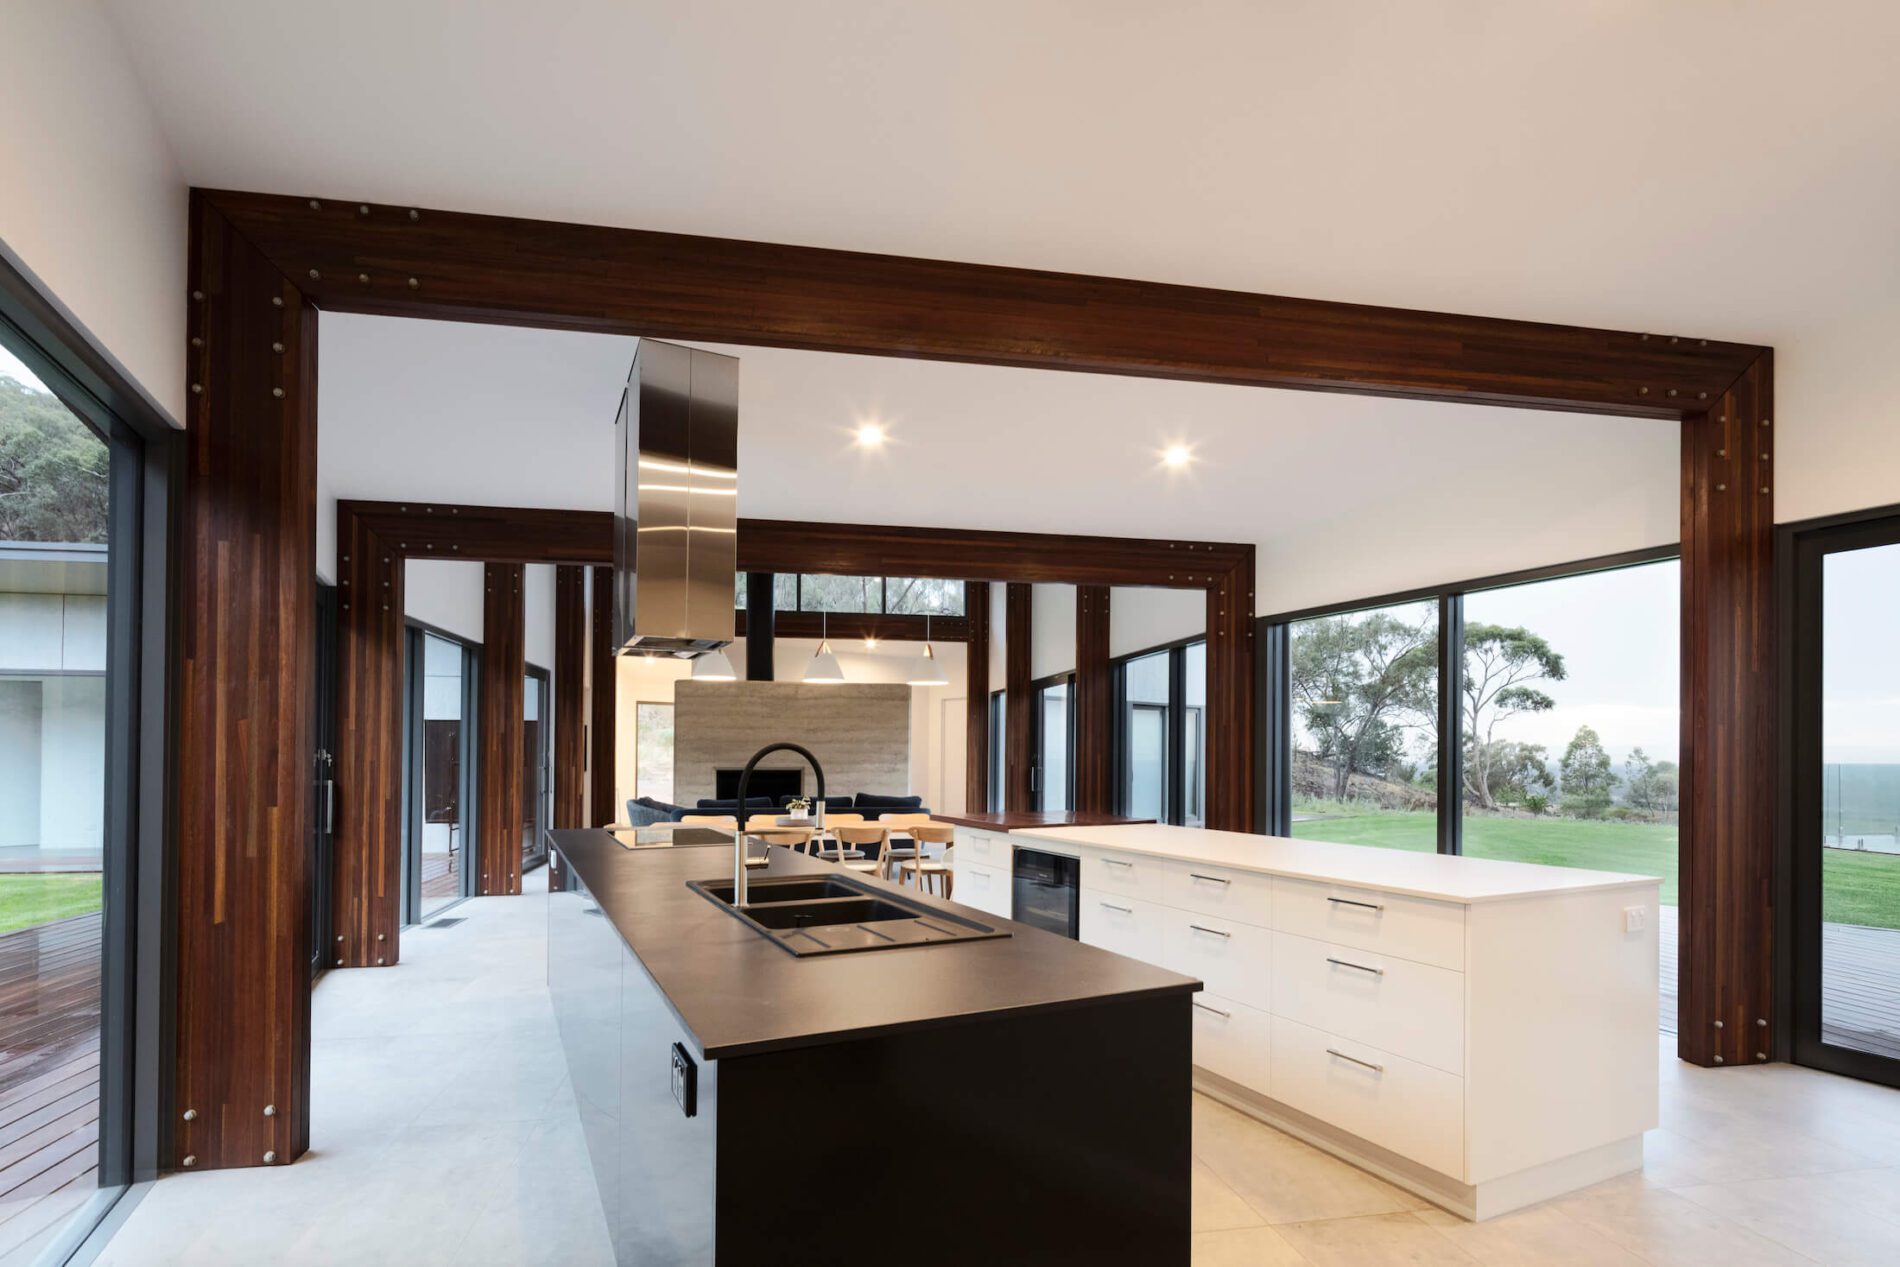 Contemporary kitchen with expressed timber beams and windows on all sides